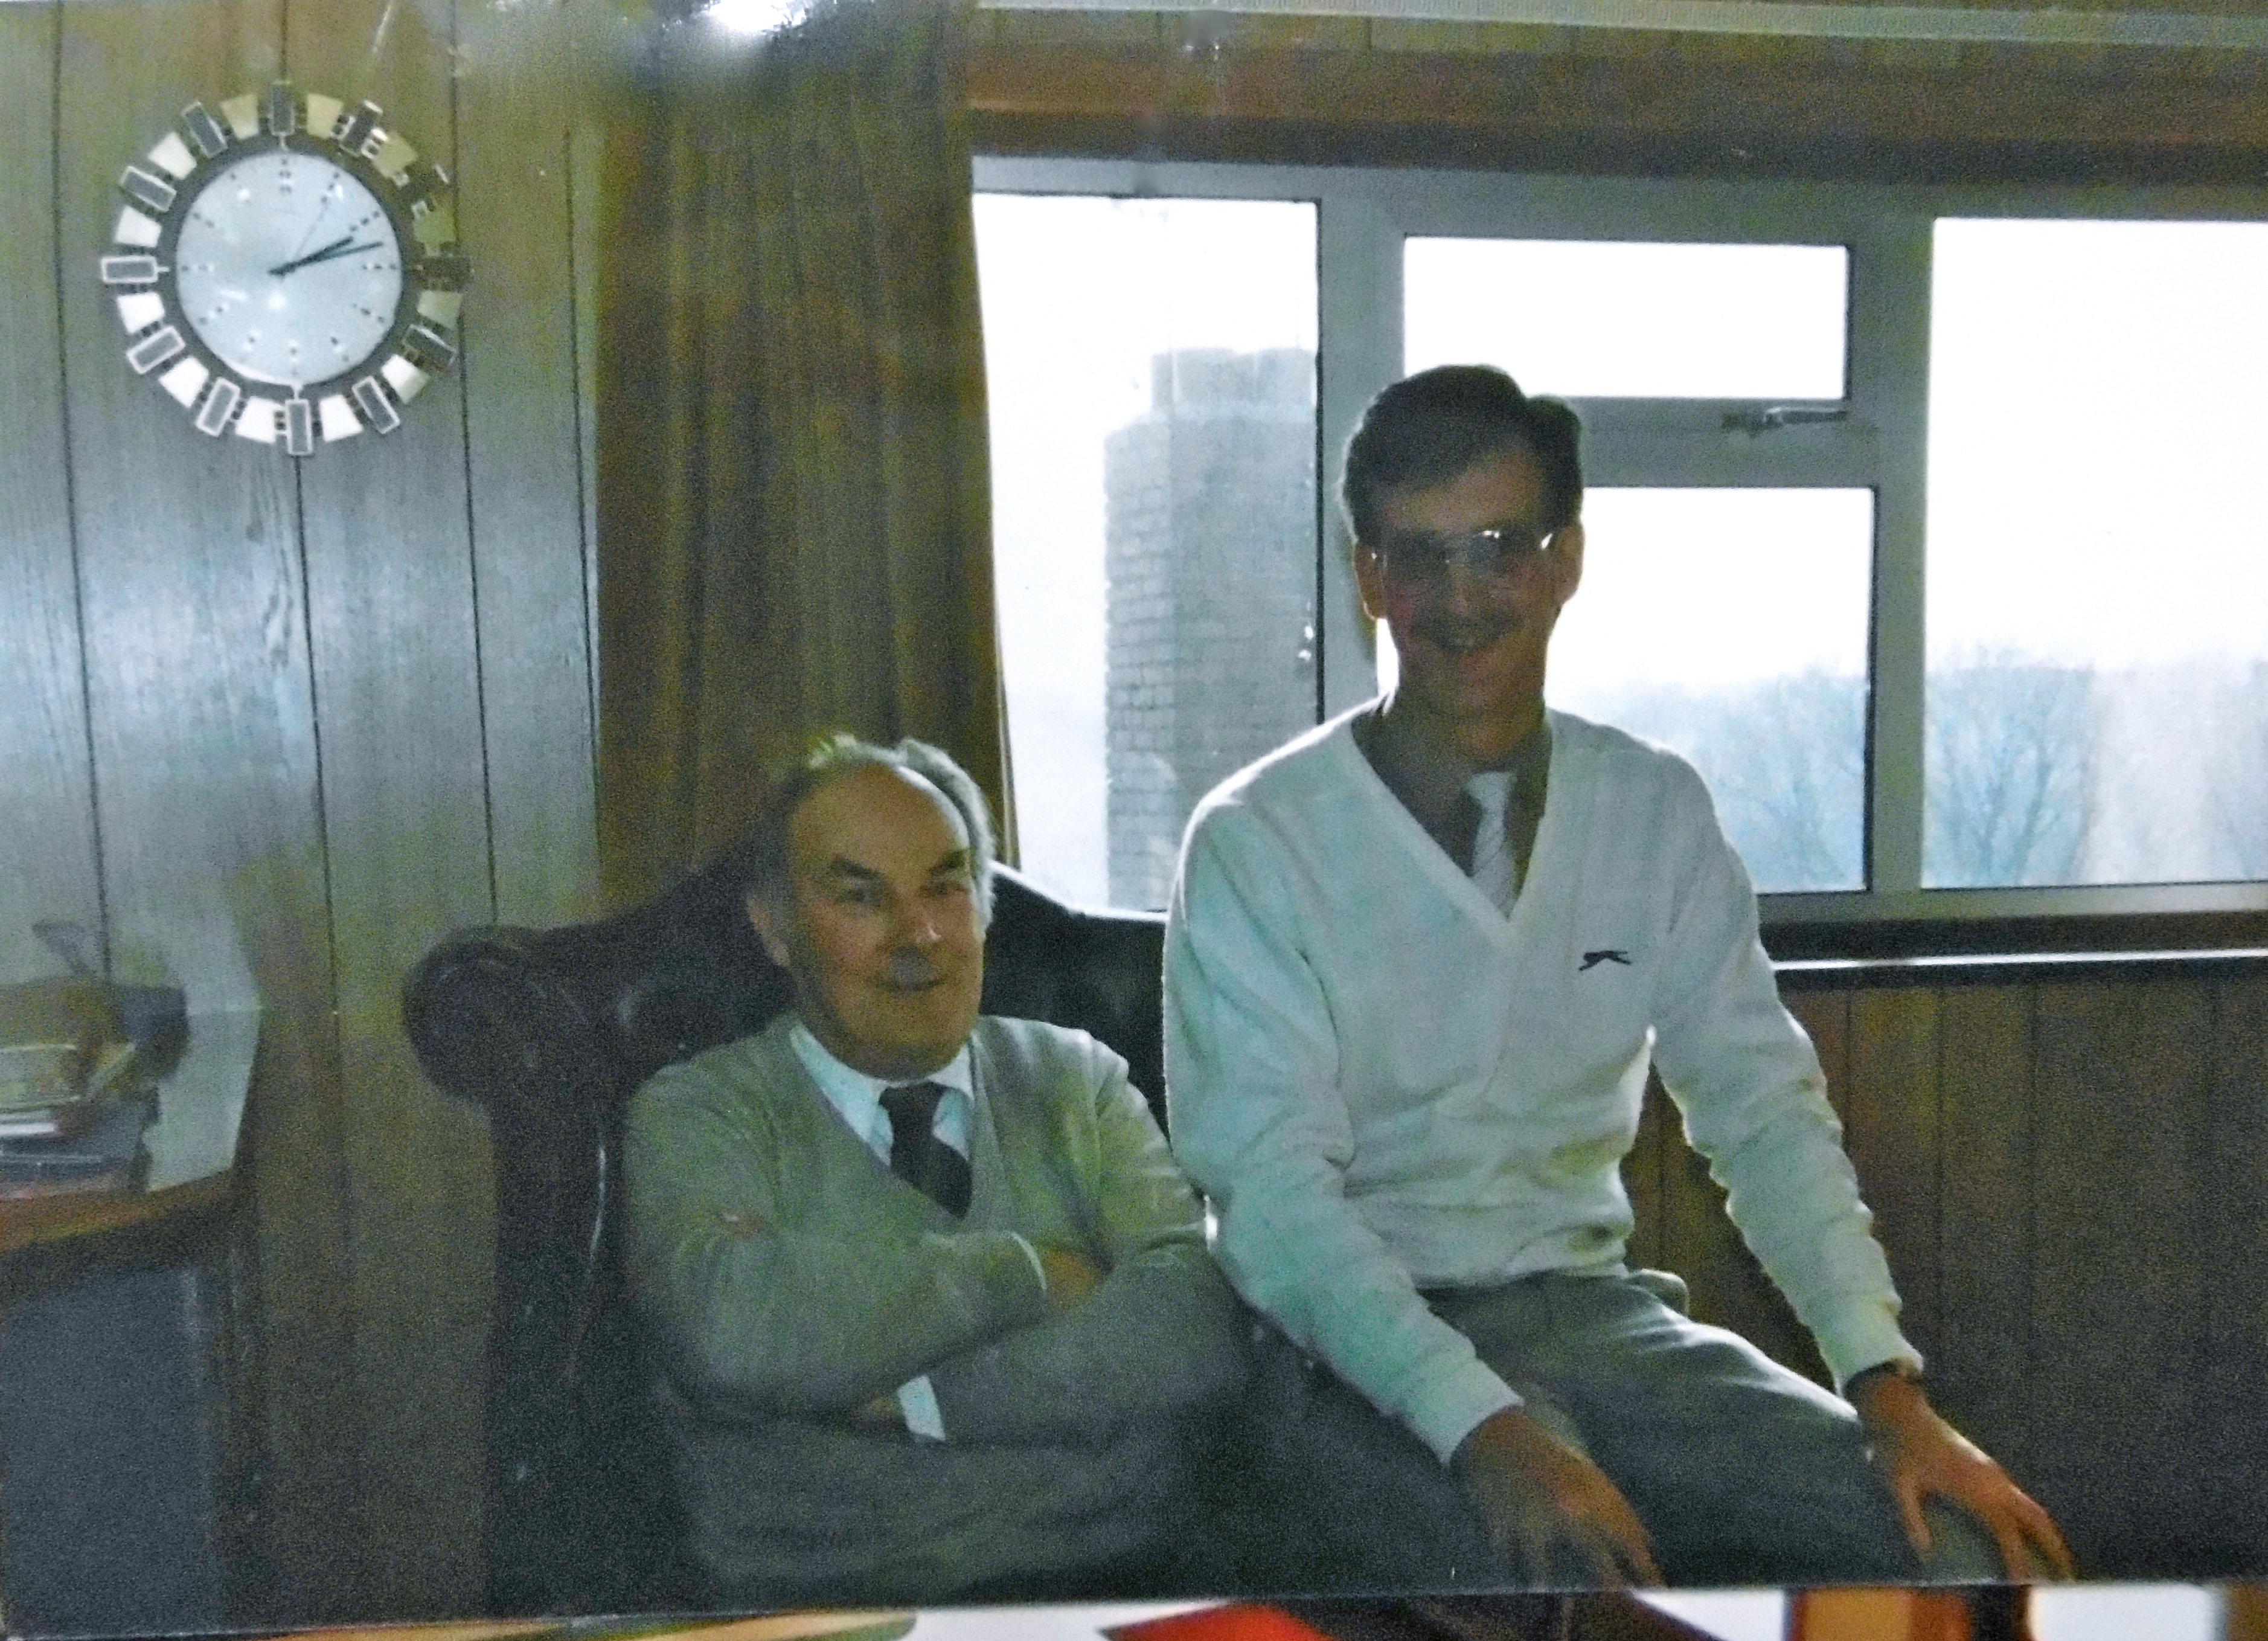 My dad and Mick in the Avion's office. They were close friends, and Mick gave the eulogy at my dad's funeral.